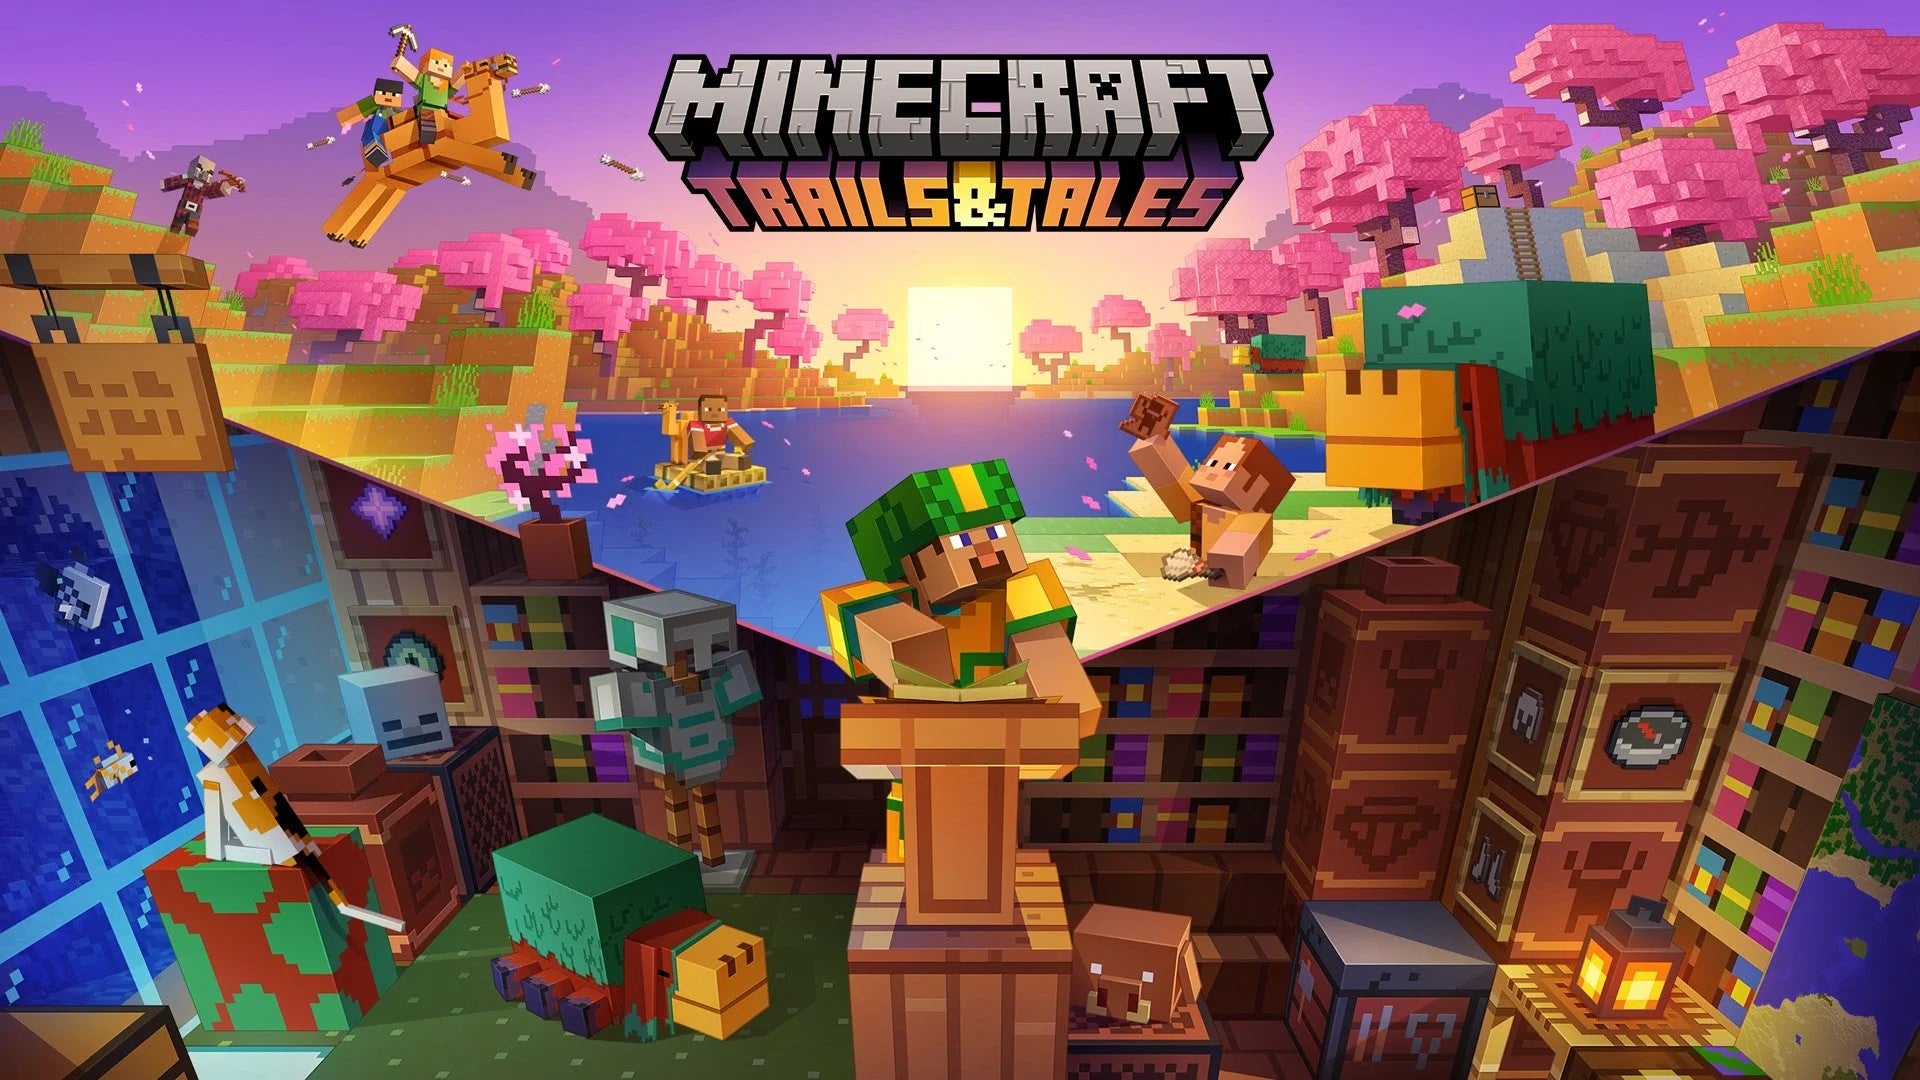 Everything new in Minecraft 1.20 Trails and Tales update!